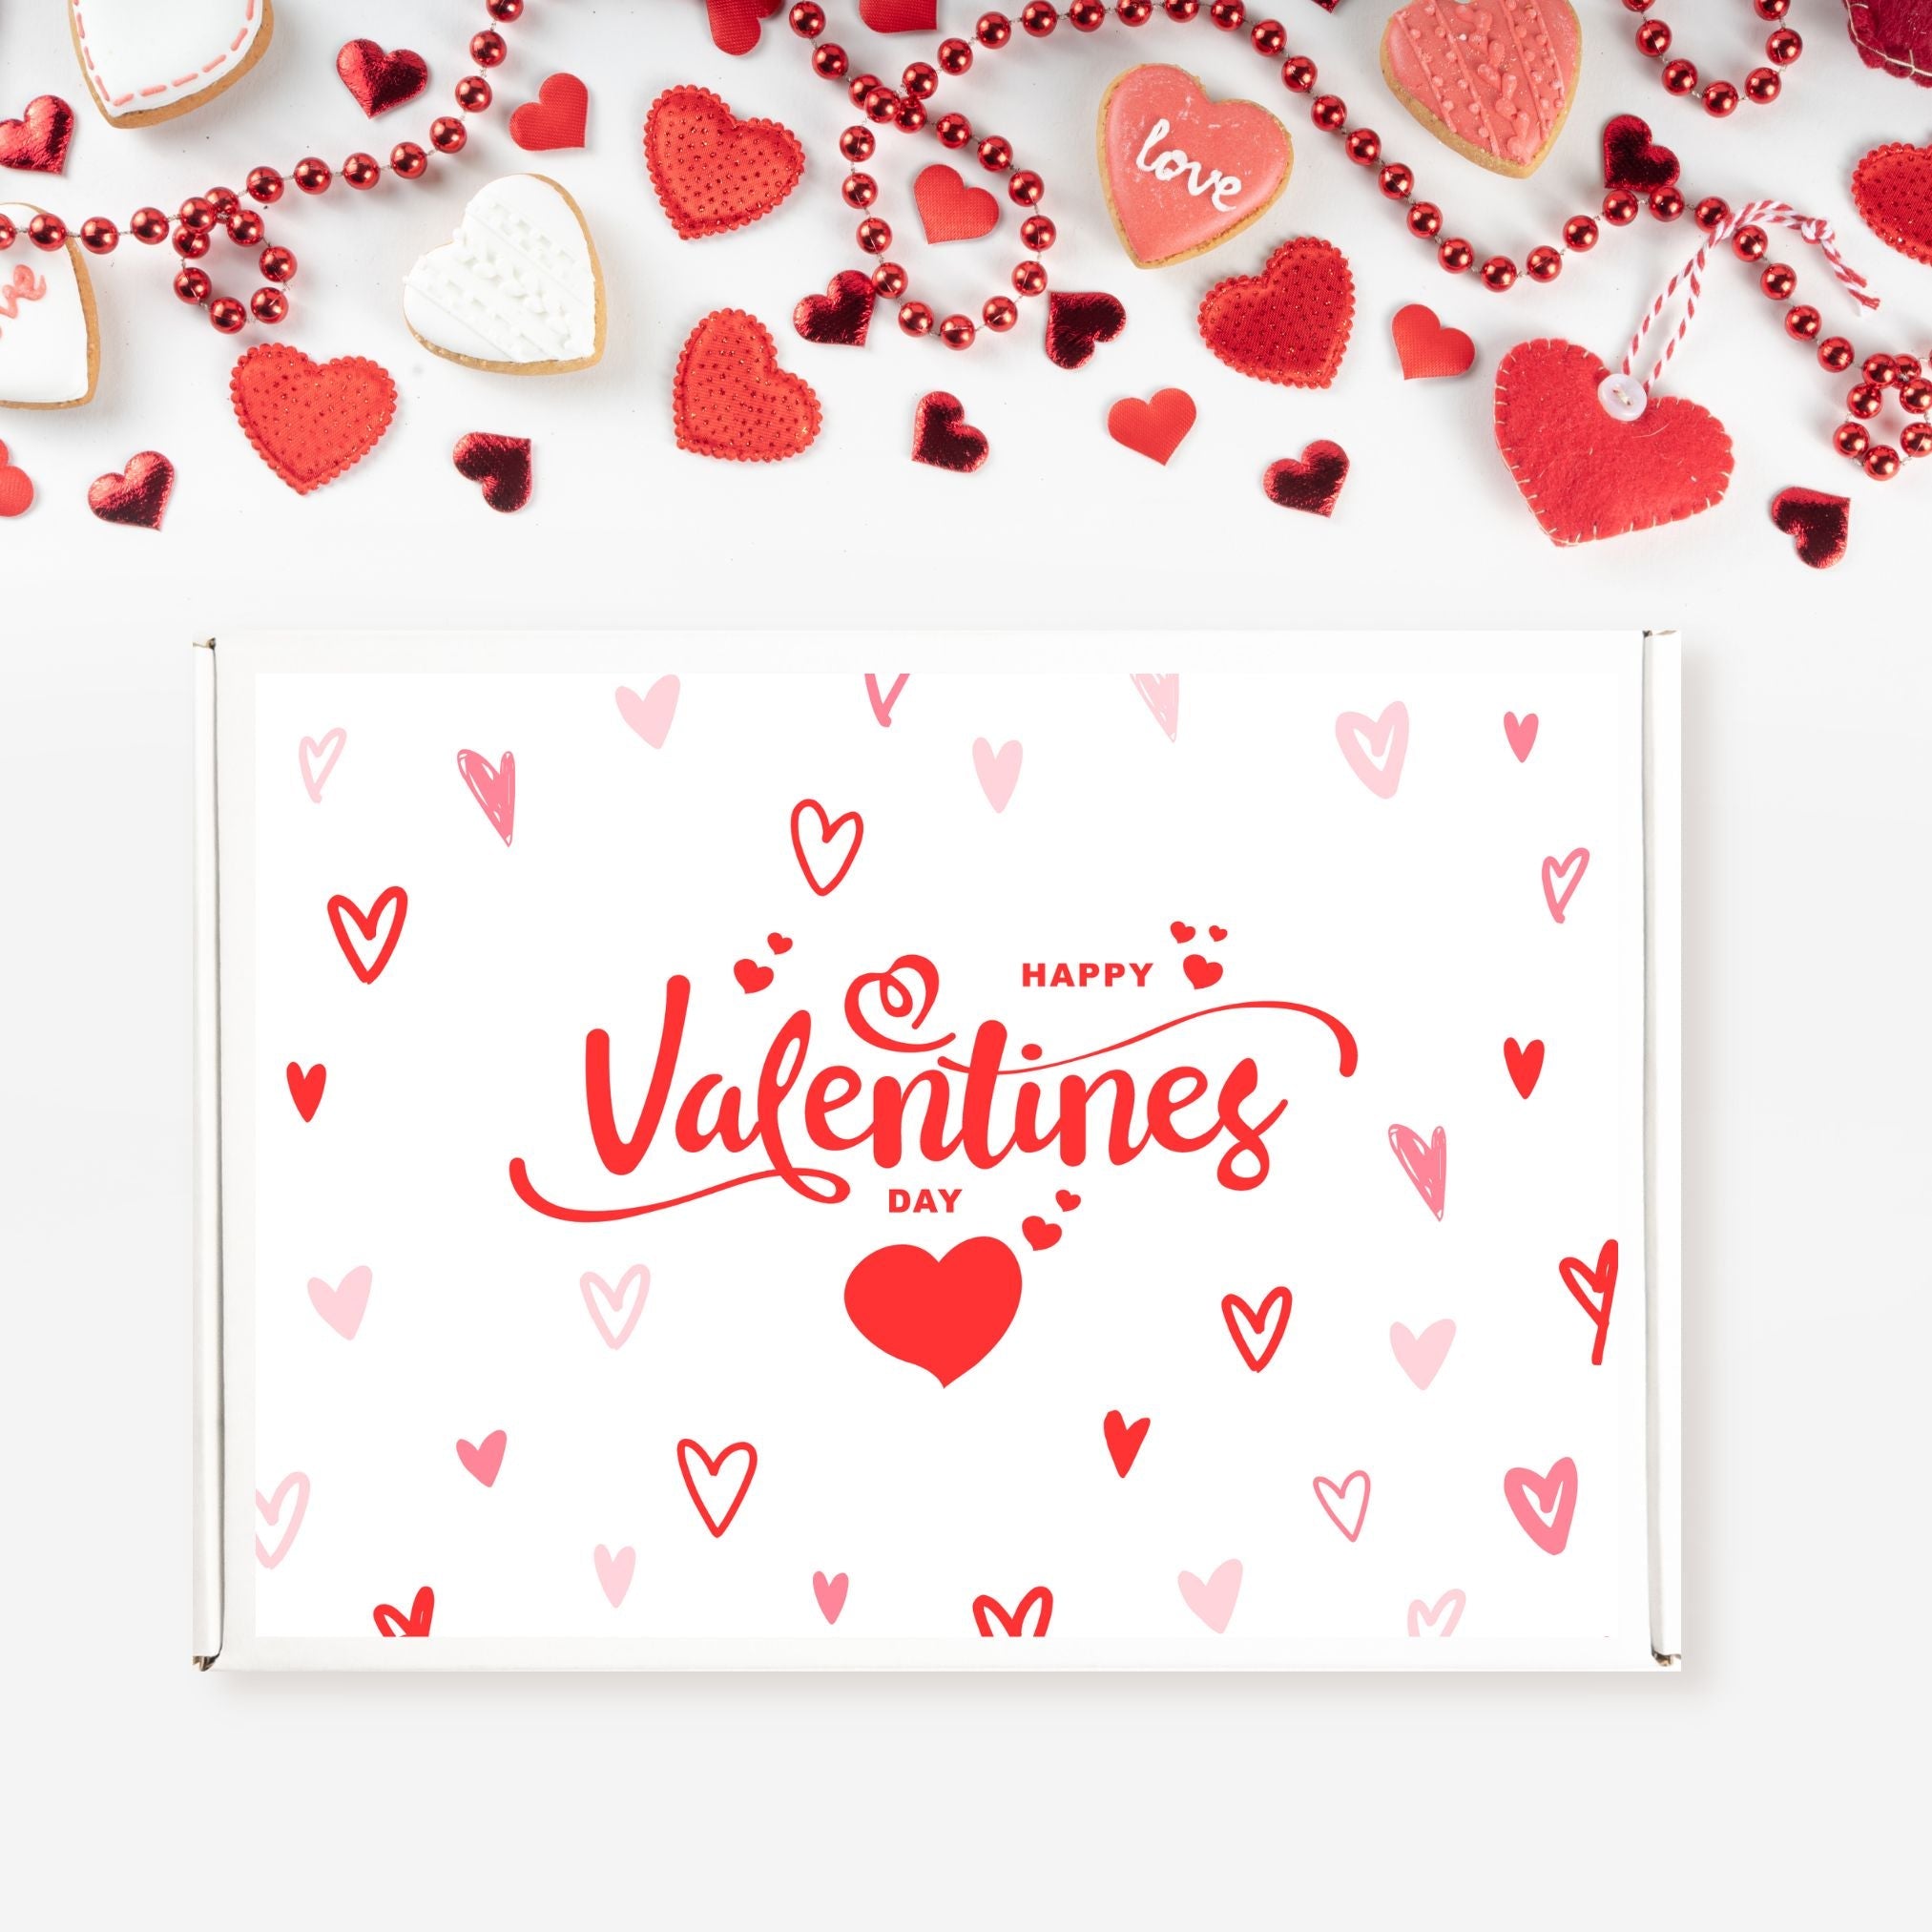 Assorted Valentine's gift ideas from Heavenly Boxes collection, featuring Valentine's boxes and perfect Valentine's gift for her